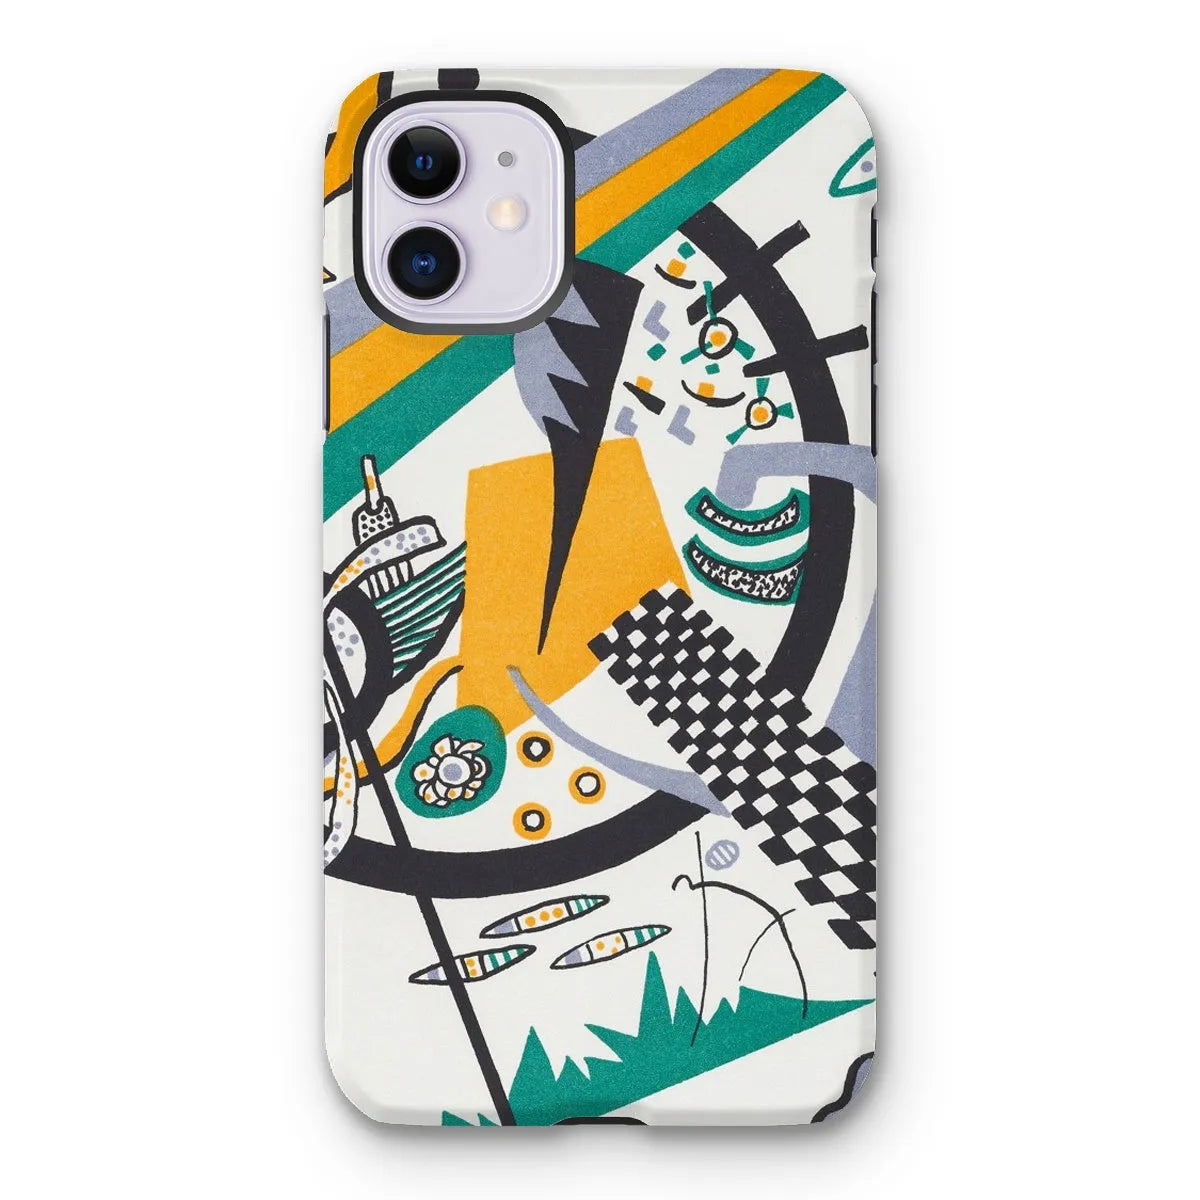 Small Worlds Iv - Expressionist Phone Case - Wassily Kandinsky - Iphone 11 / Matte - Mobile Phone Cases - Aesthetic Art